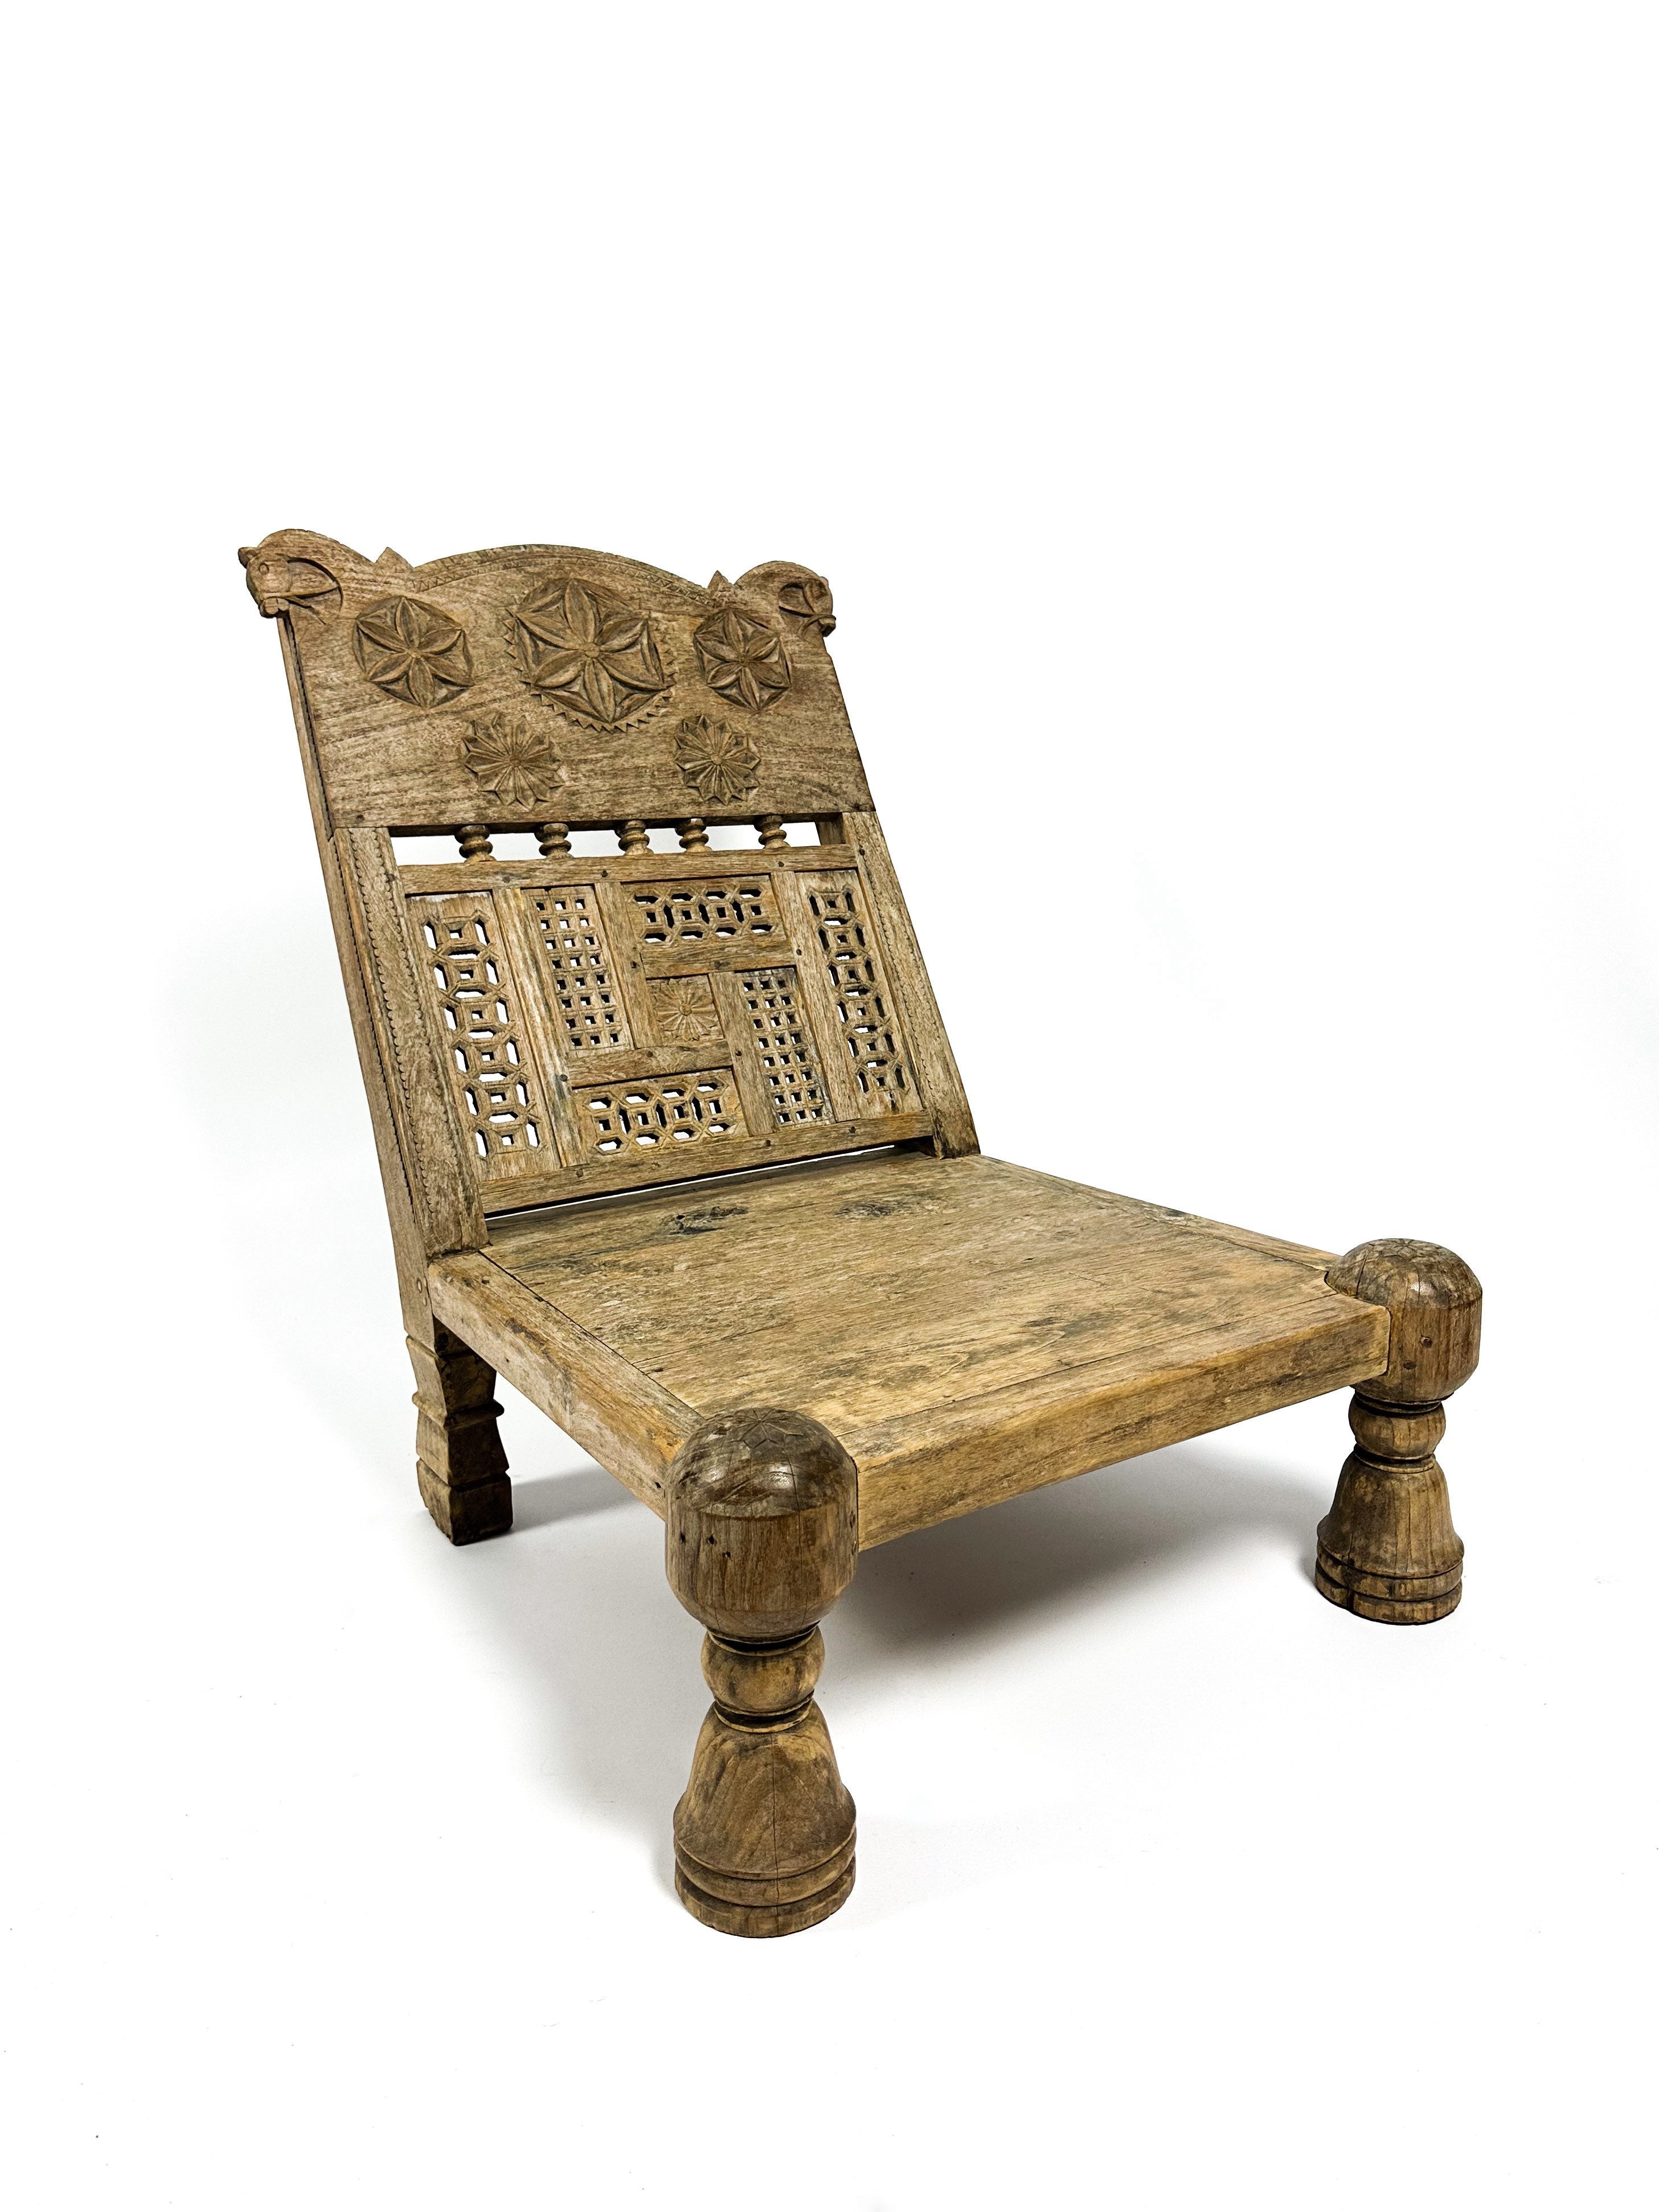 The old Lombok wooden chair